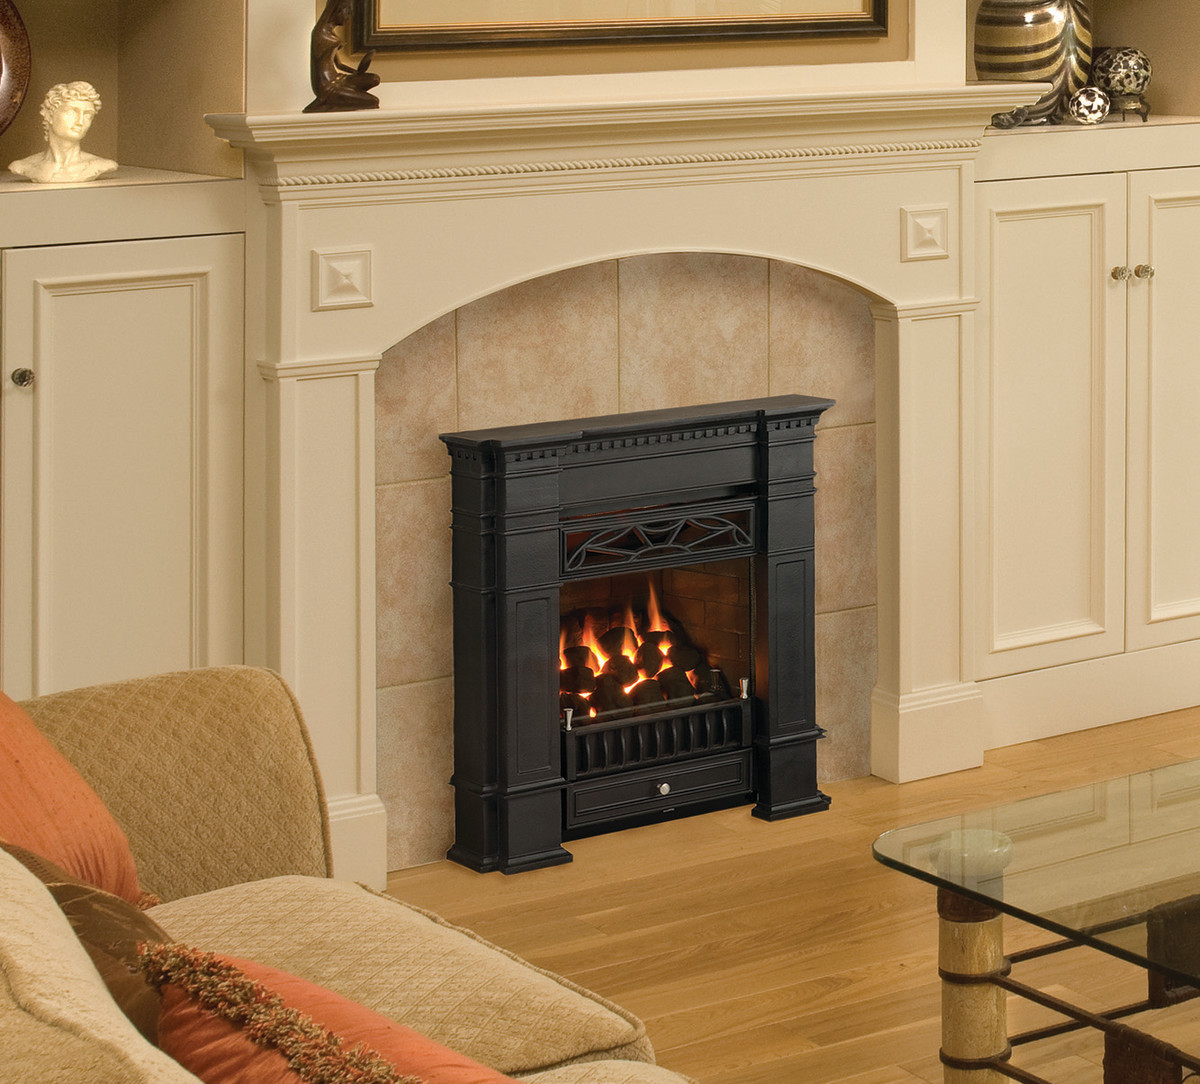 Radiant gas fireplace by Miles Industries/Valor Gas Fireplaces.